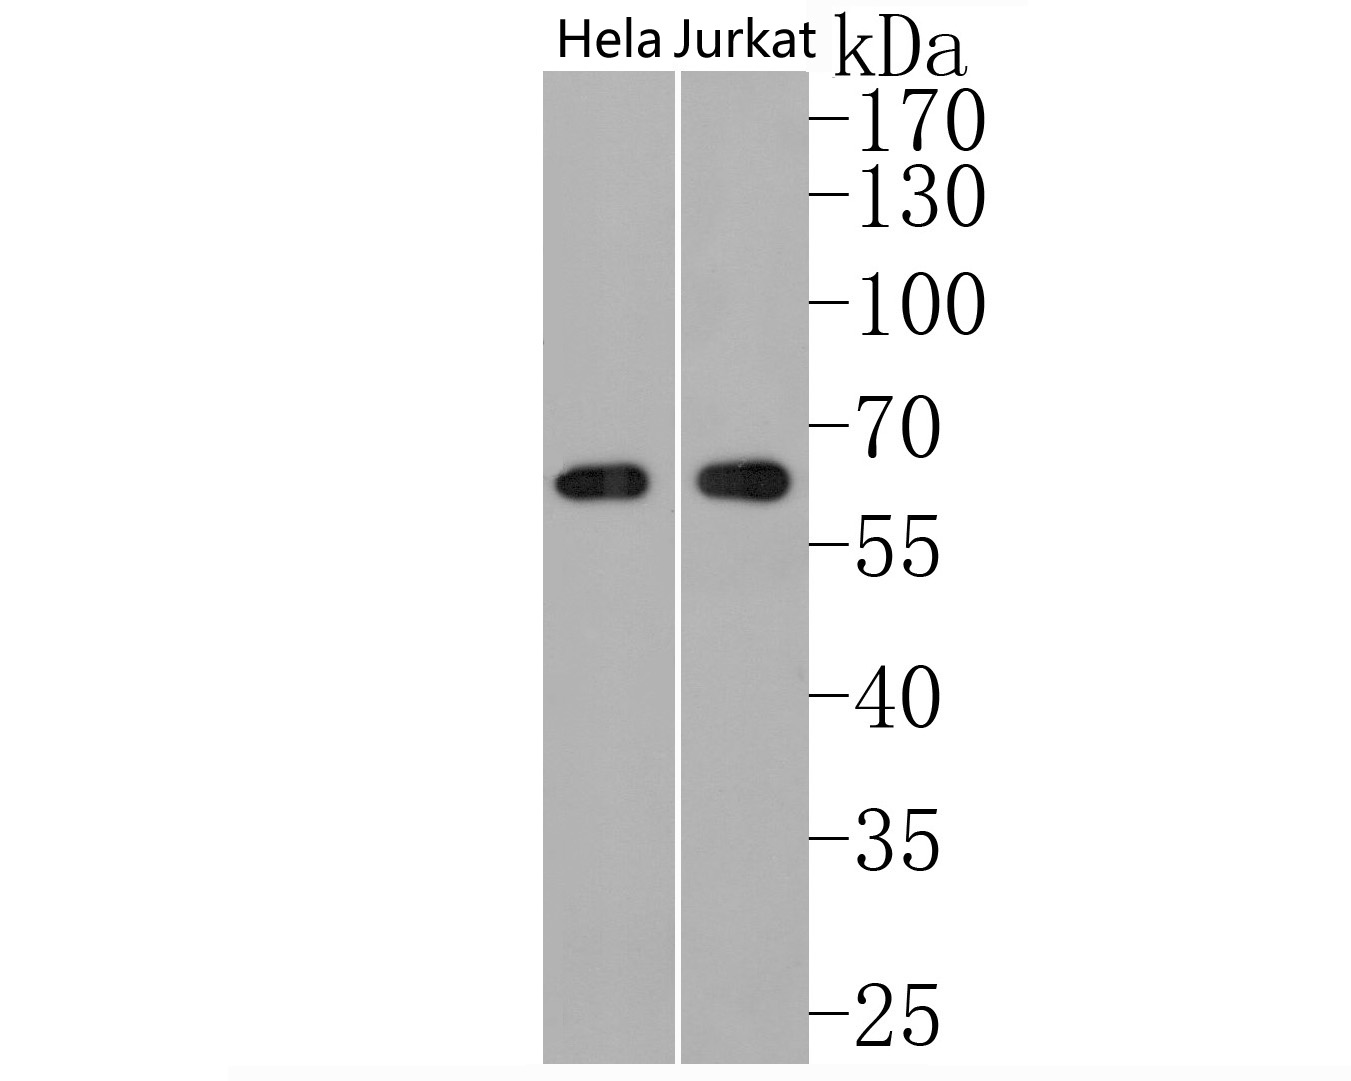 Western blot analysis of USP39 on Hela and Jurkat cell lysates. Proteins were transferred to a PVDF membrane and blocked with 5% BSA in PBS for 1 hour at room temperature. The primary antibody (HA720034, 1/500) was used in 5% BSA at room temperature for 2 hours. Goat Anti-Rabbit IgG - HRP Secondary Antibody (HA1001) at 1:200,000 dilution was used for 1 hour at room temperature.